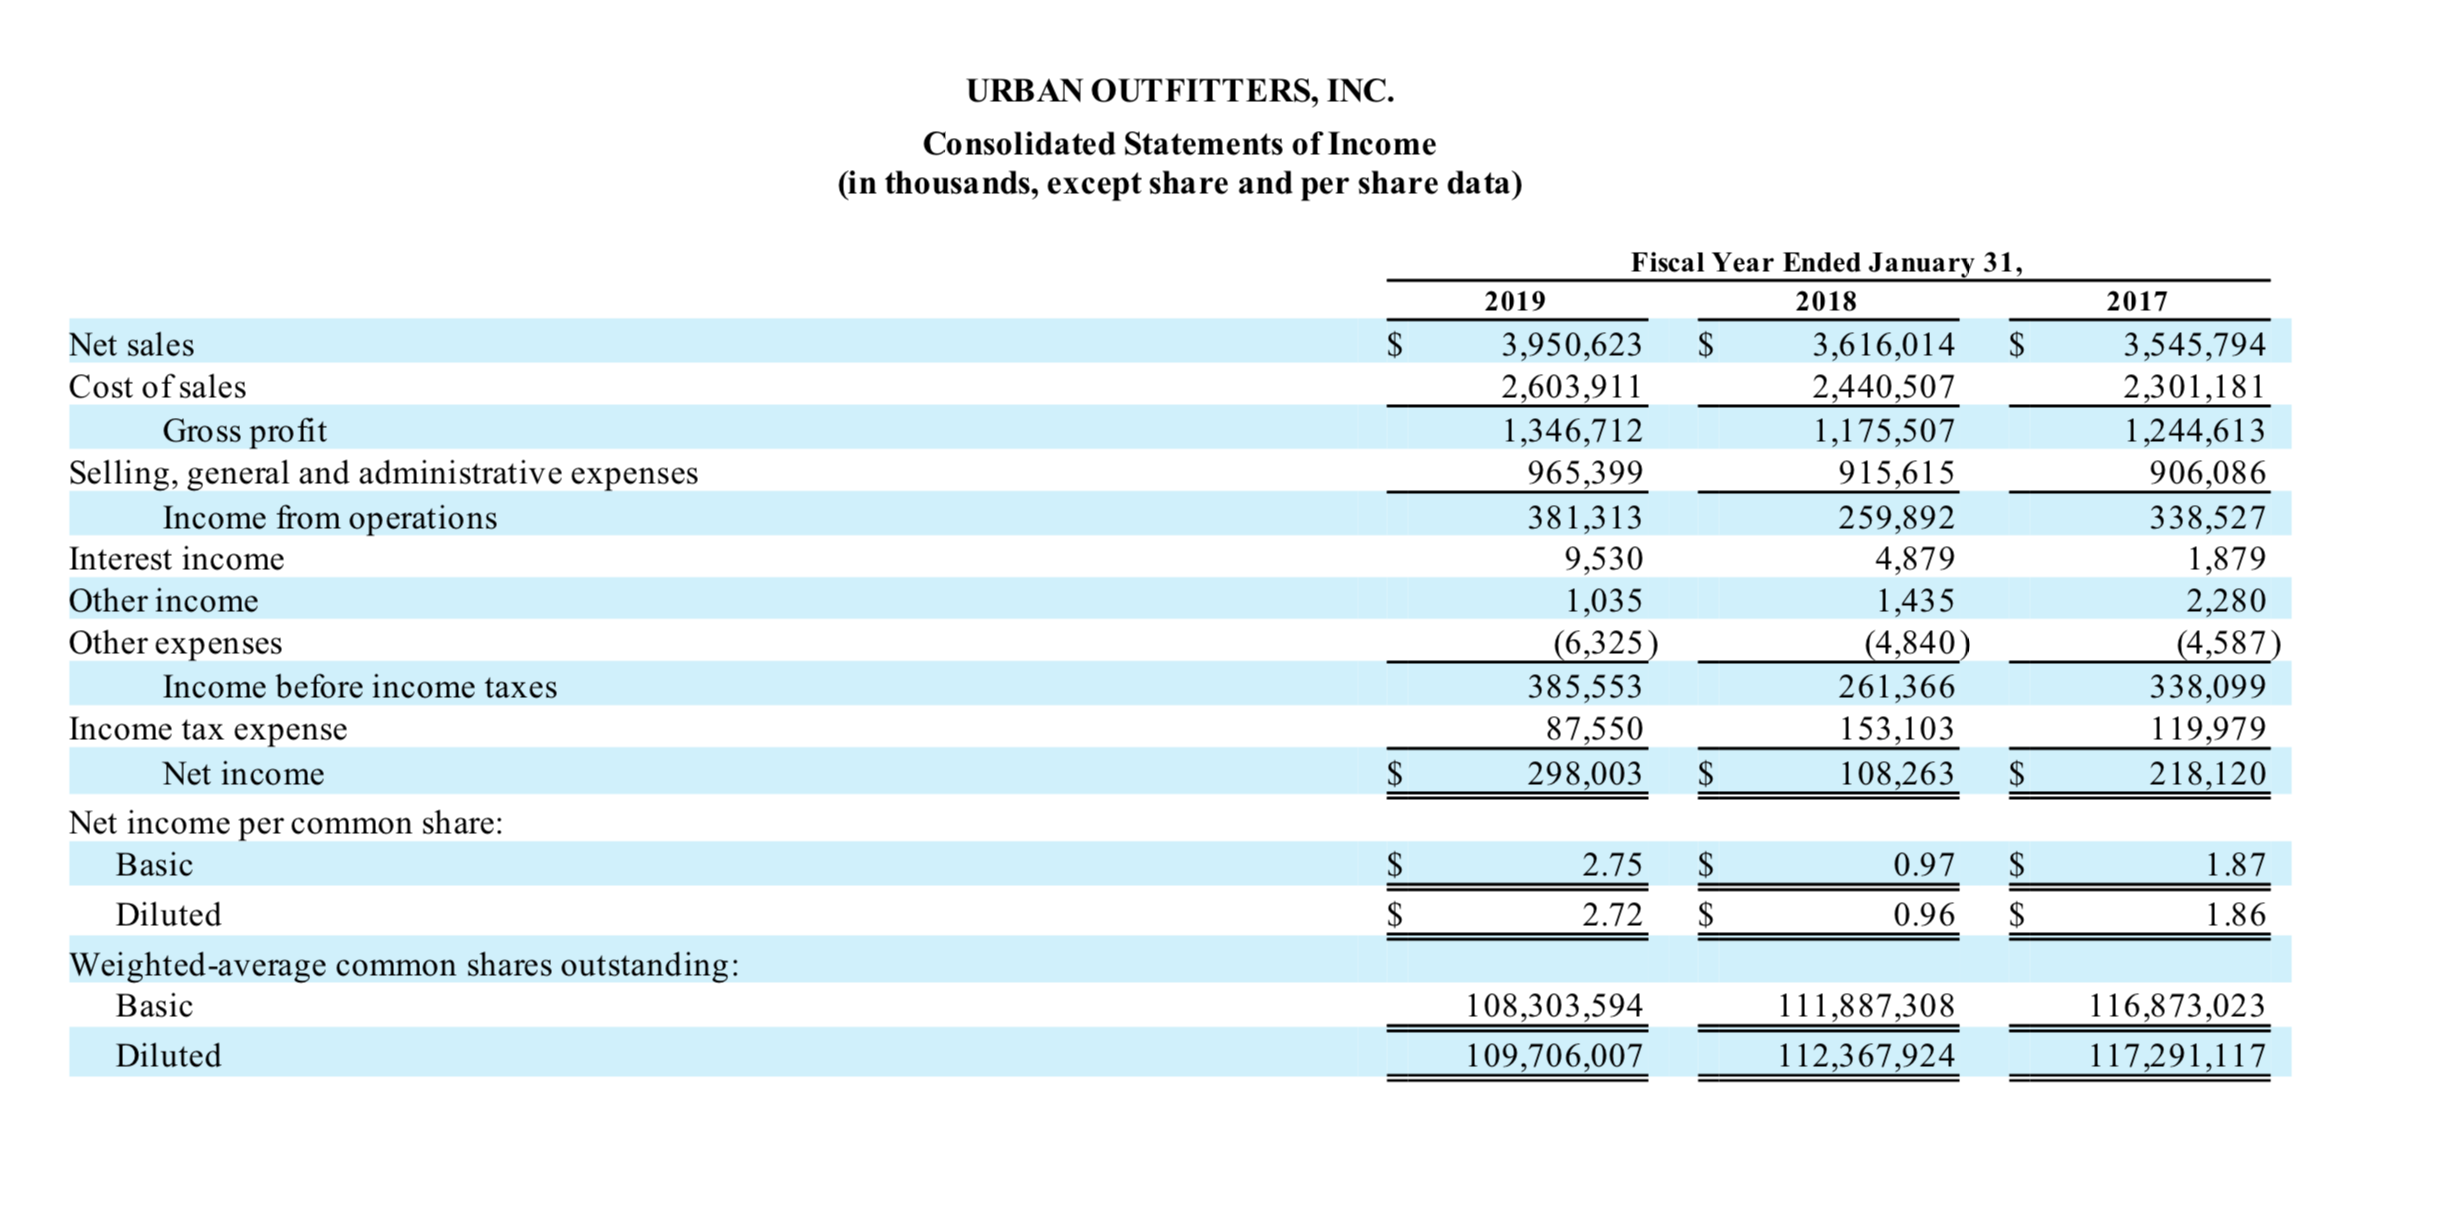 URBAN OUTFITTERS, INC.
Consolidated Statements of Income
(in thousands, except share and per share data)
Fiscal Year Ended January 31,
2019
2018
2017
3,616,014
2,440,507
1,175,507
Net sales
3,950,623
3,545,794
Cost of sales
2,603,911
1,346,712
2,301,181
1,244,613
Gross pro fit
Selling, general and administrative expenses
Income from operations
965,399
381,313
9,530
1,035
915,615
259,892
906,086
338,527
1,879
2,280
Interest income
4,879
1,435
Other income
Other expenses
(6,325)
385,553
(4,840)
261,366
153,103
(4,587)
338,099
Income before income taxes
Income tax expense
87,550
298,003
119,979
218,120
Net income
108,263
Net income per common share:
Basic
2.75
0.97
1.87
Diluted
2.72
0.96
1.86
Weighted-average common shares outstanding:
Basic
108,303,594
111,887,308
116,873,023
Diluted
109,706,007
112,367,924
117,291,117
All All
